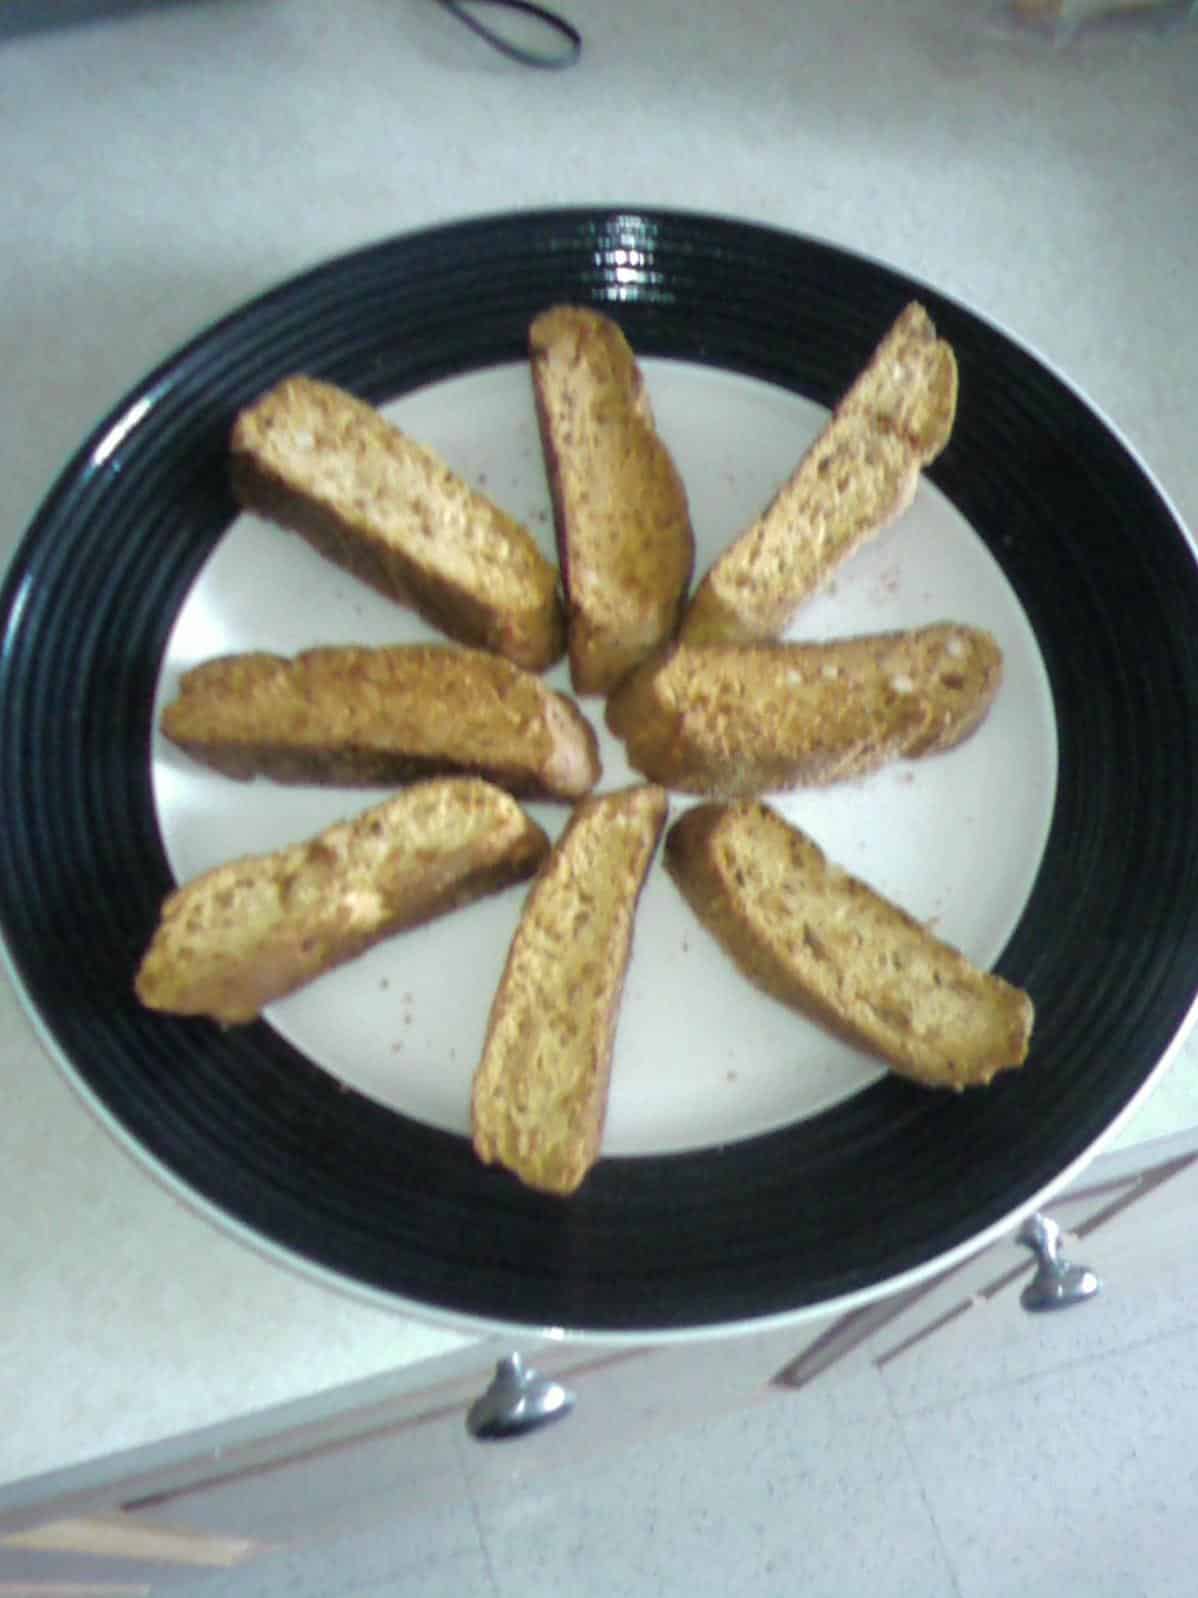  A stack of biscotti waiting to be dunked into a bowl of warm tomato soup